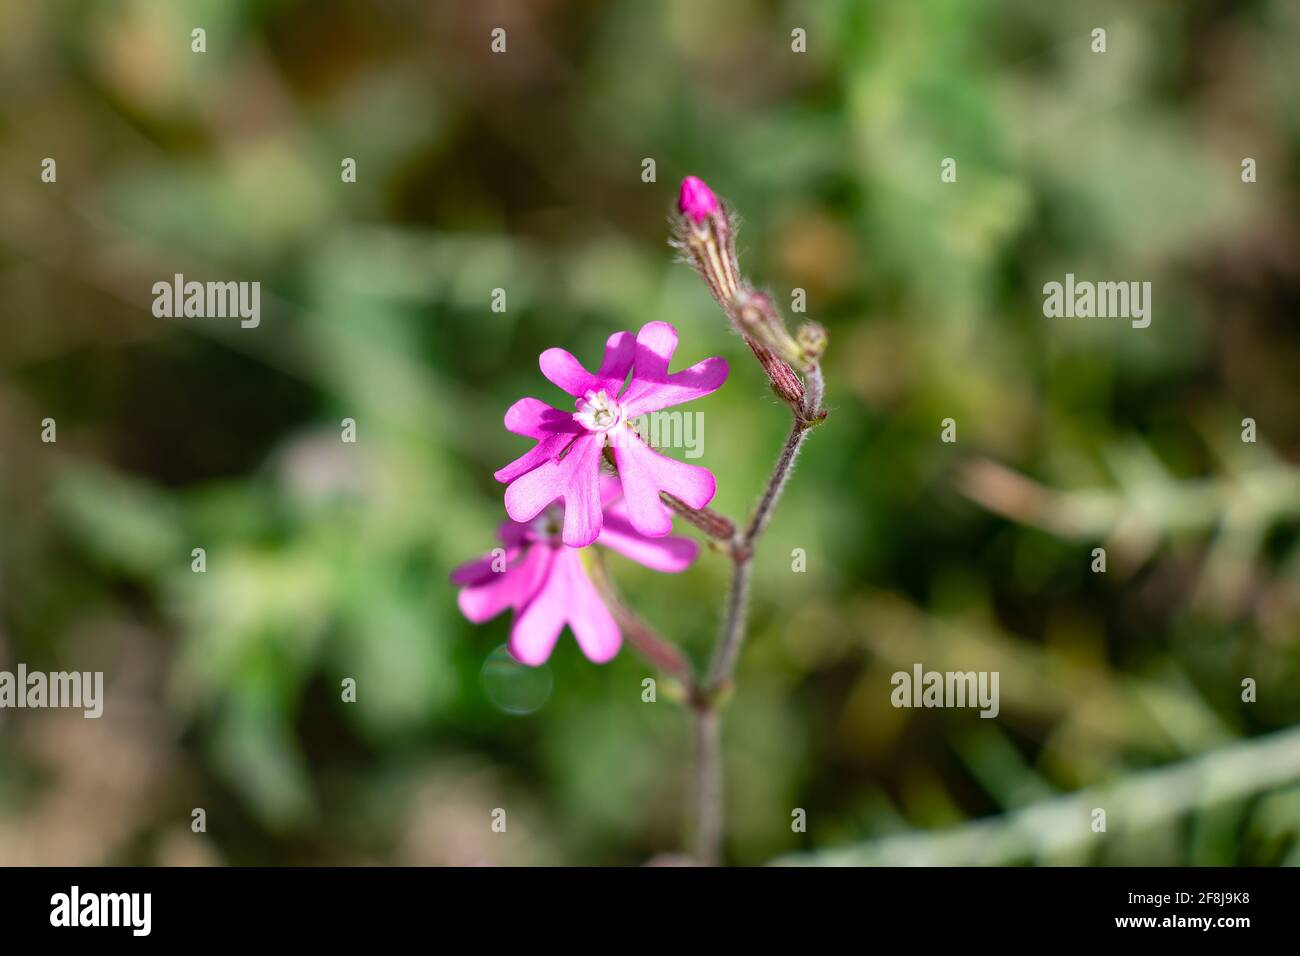 Silene colorata or Silene scabriflora is a species that belongs to the Caryophyllaceae family. It is distributed throughout the Iberian Peninsula. Stock Photo